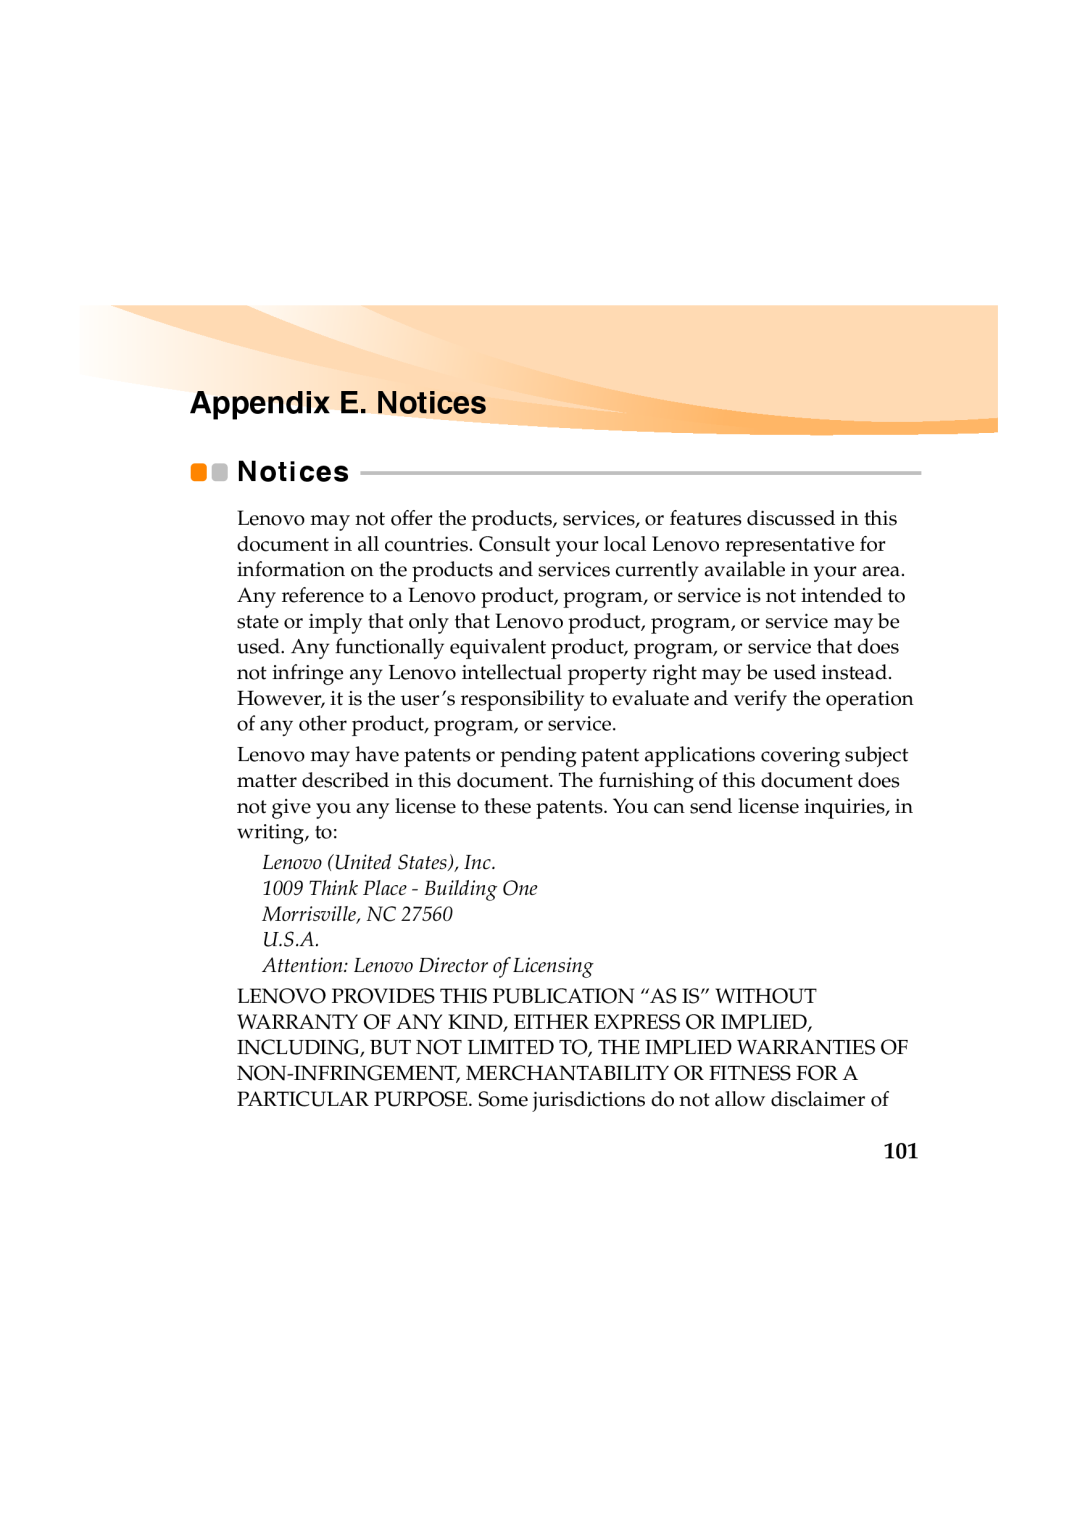 Lenovo Y460 manual Appendix E. Notices, Lenovo United States, Inc 1009 Think Place - Building One 